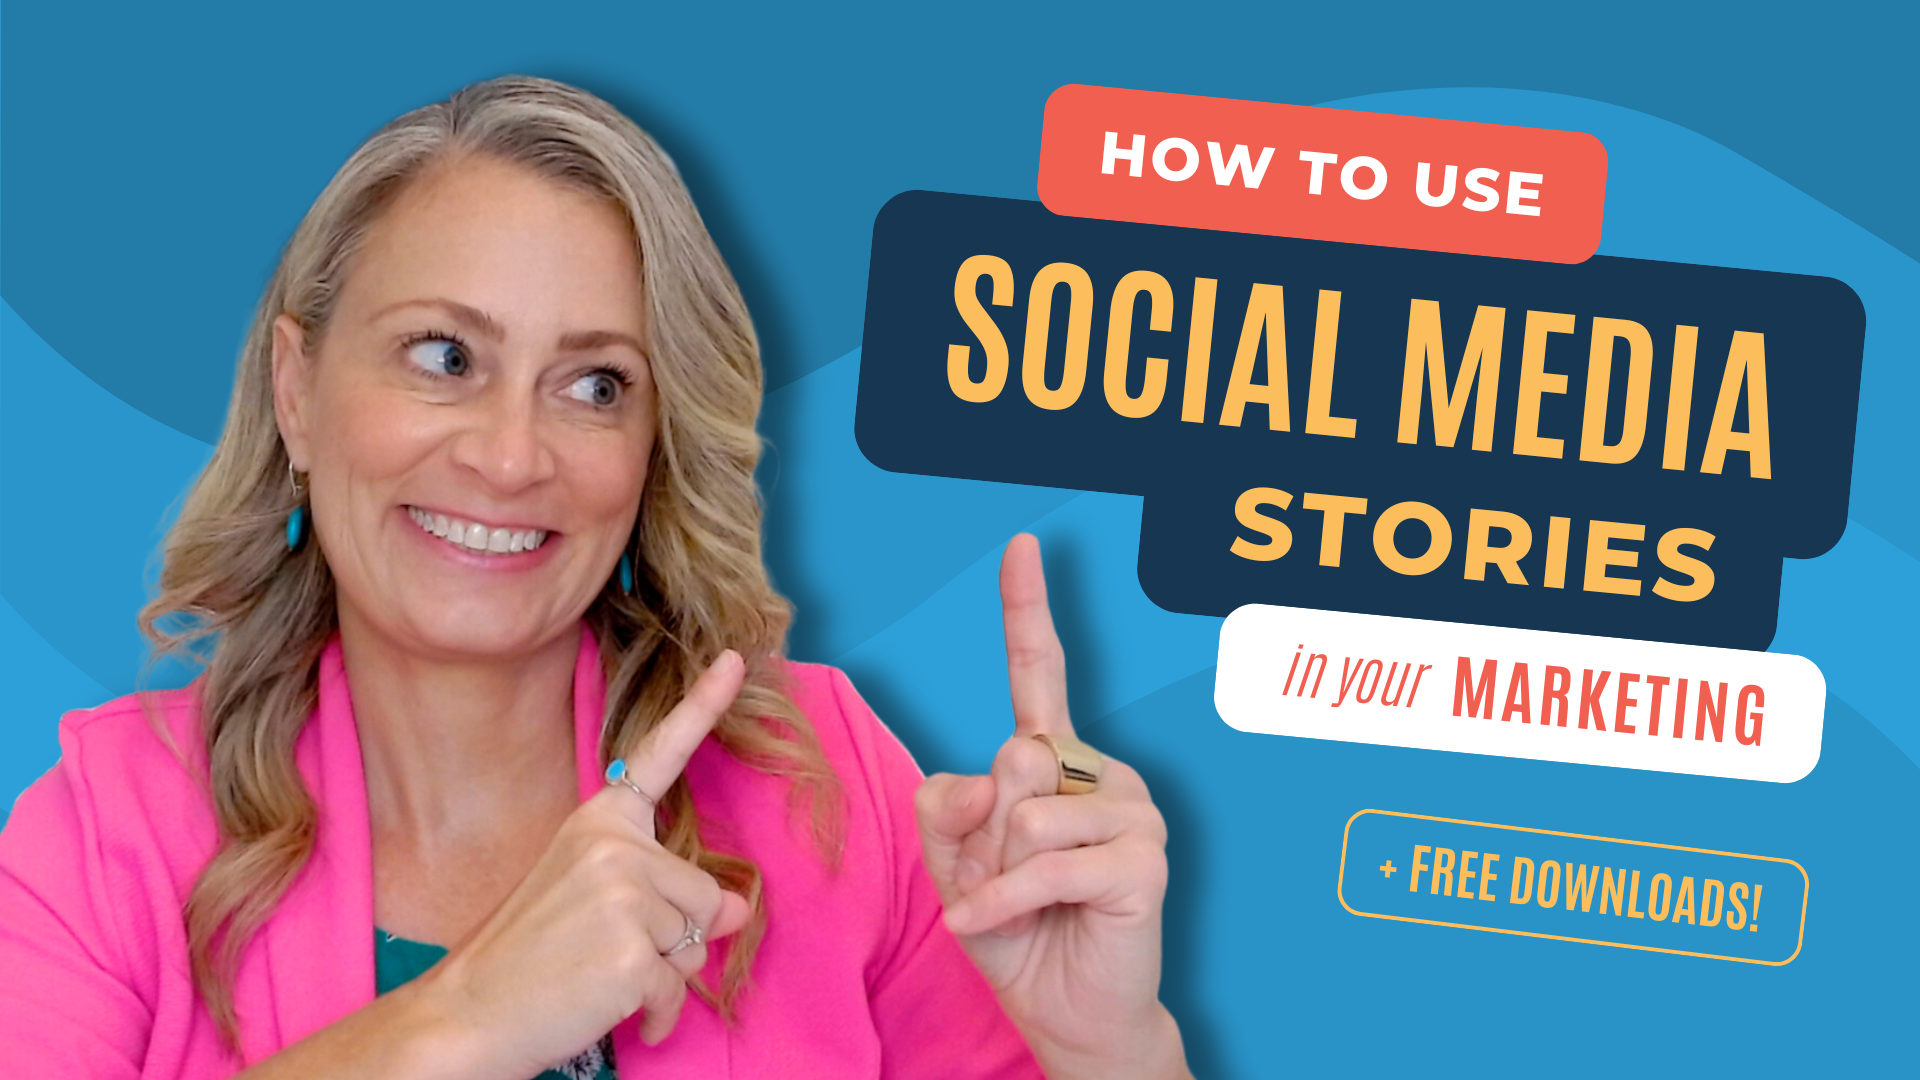 How to Use Social Media Stories in Your Marketing